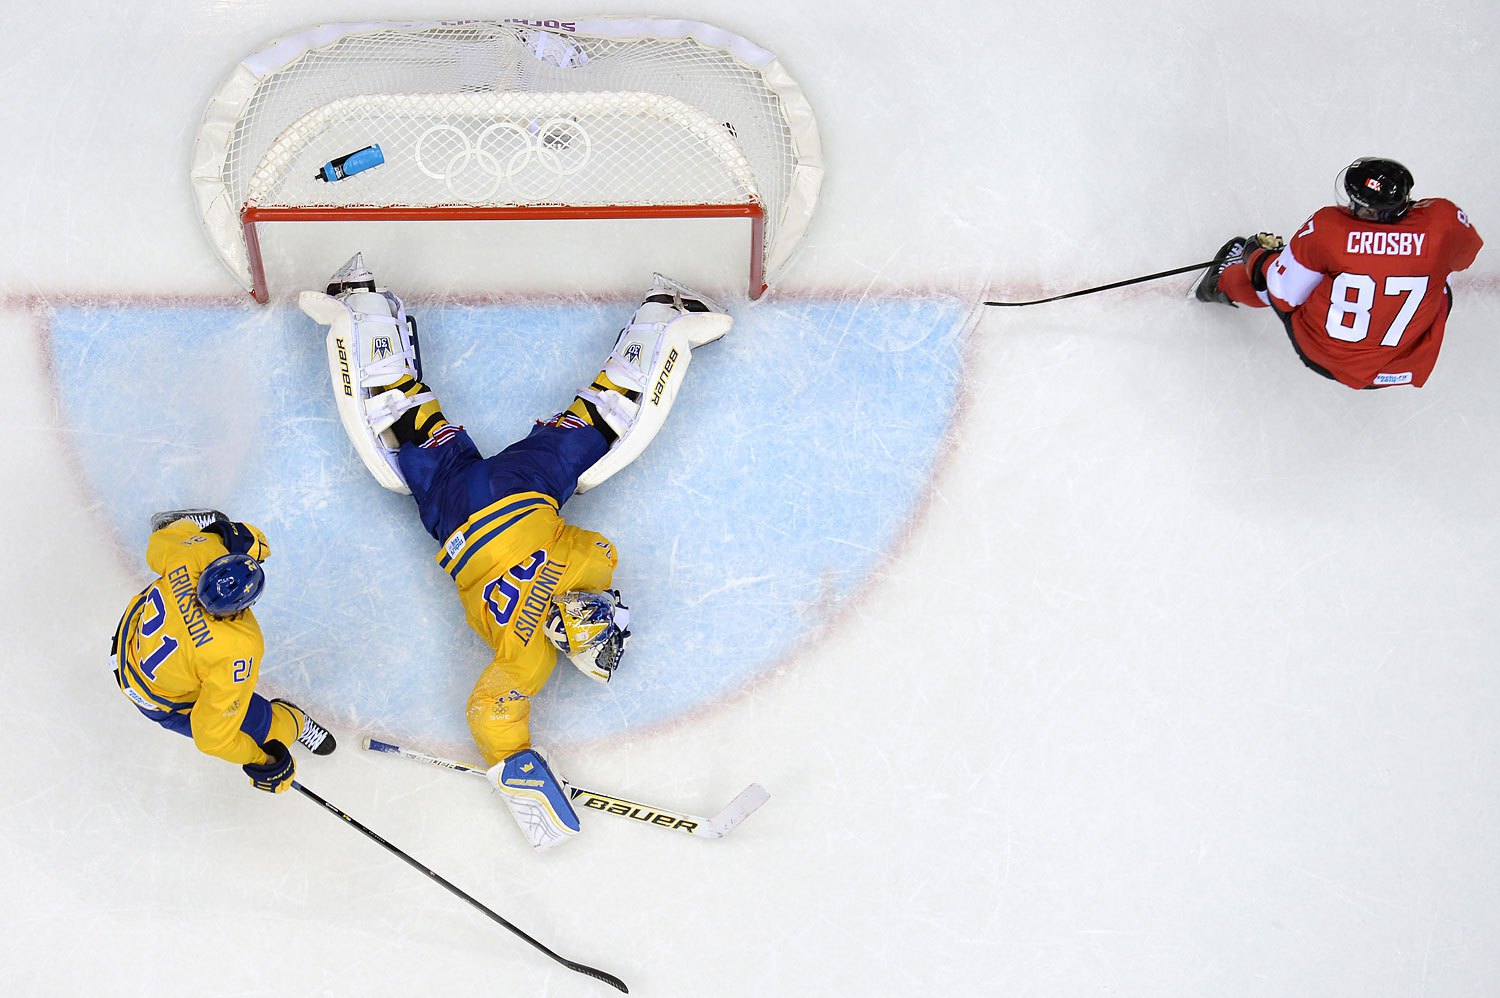 Canada's Sidney Crosby (R) scores in the nets of Sweden's goalkeeper Henrik Lundqvist as Sweden's Loui Eriksson looks on during the Men's ice hockey final Sweden vs Canada.